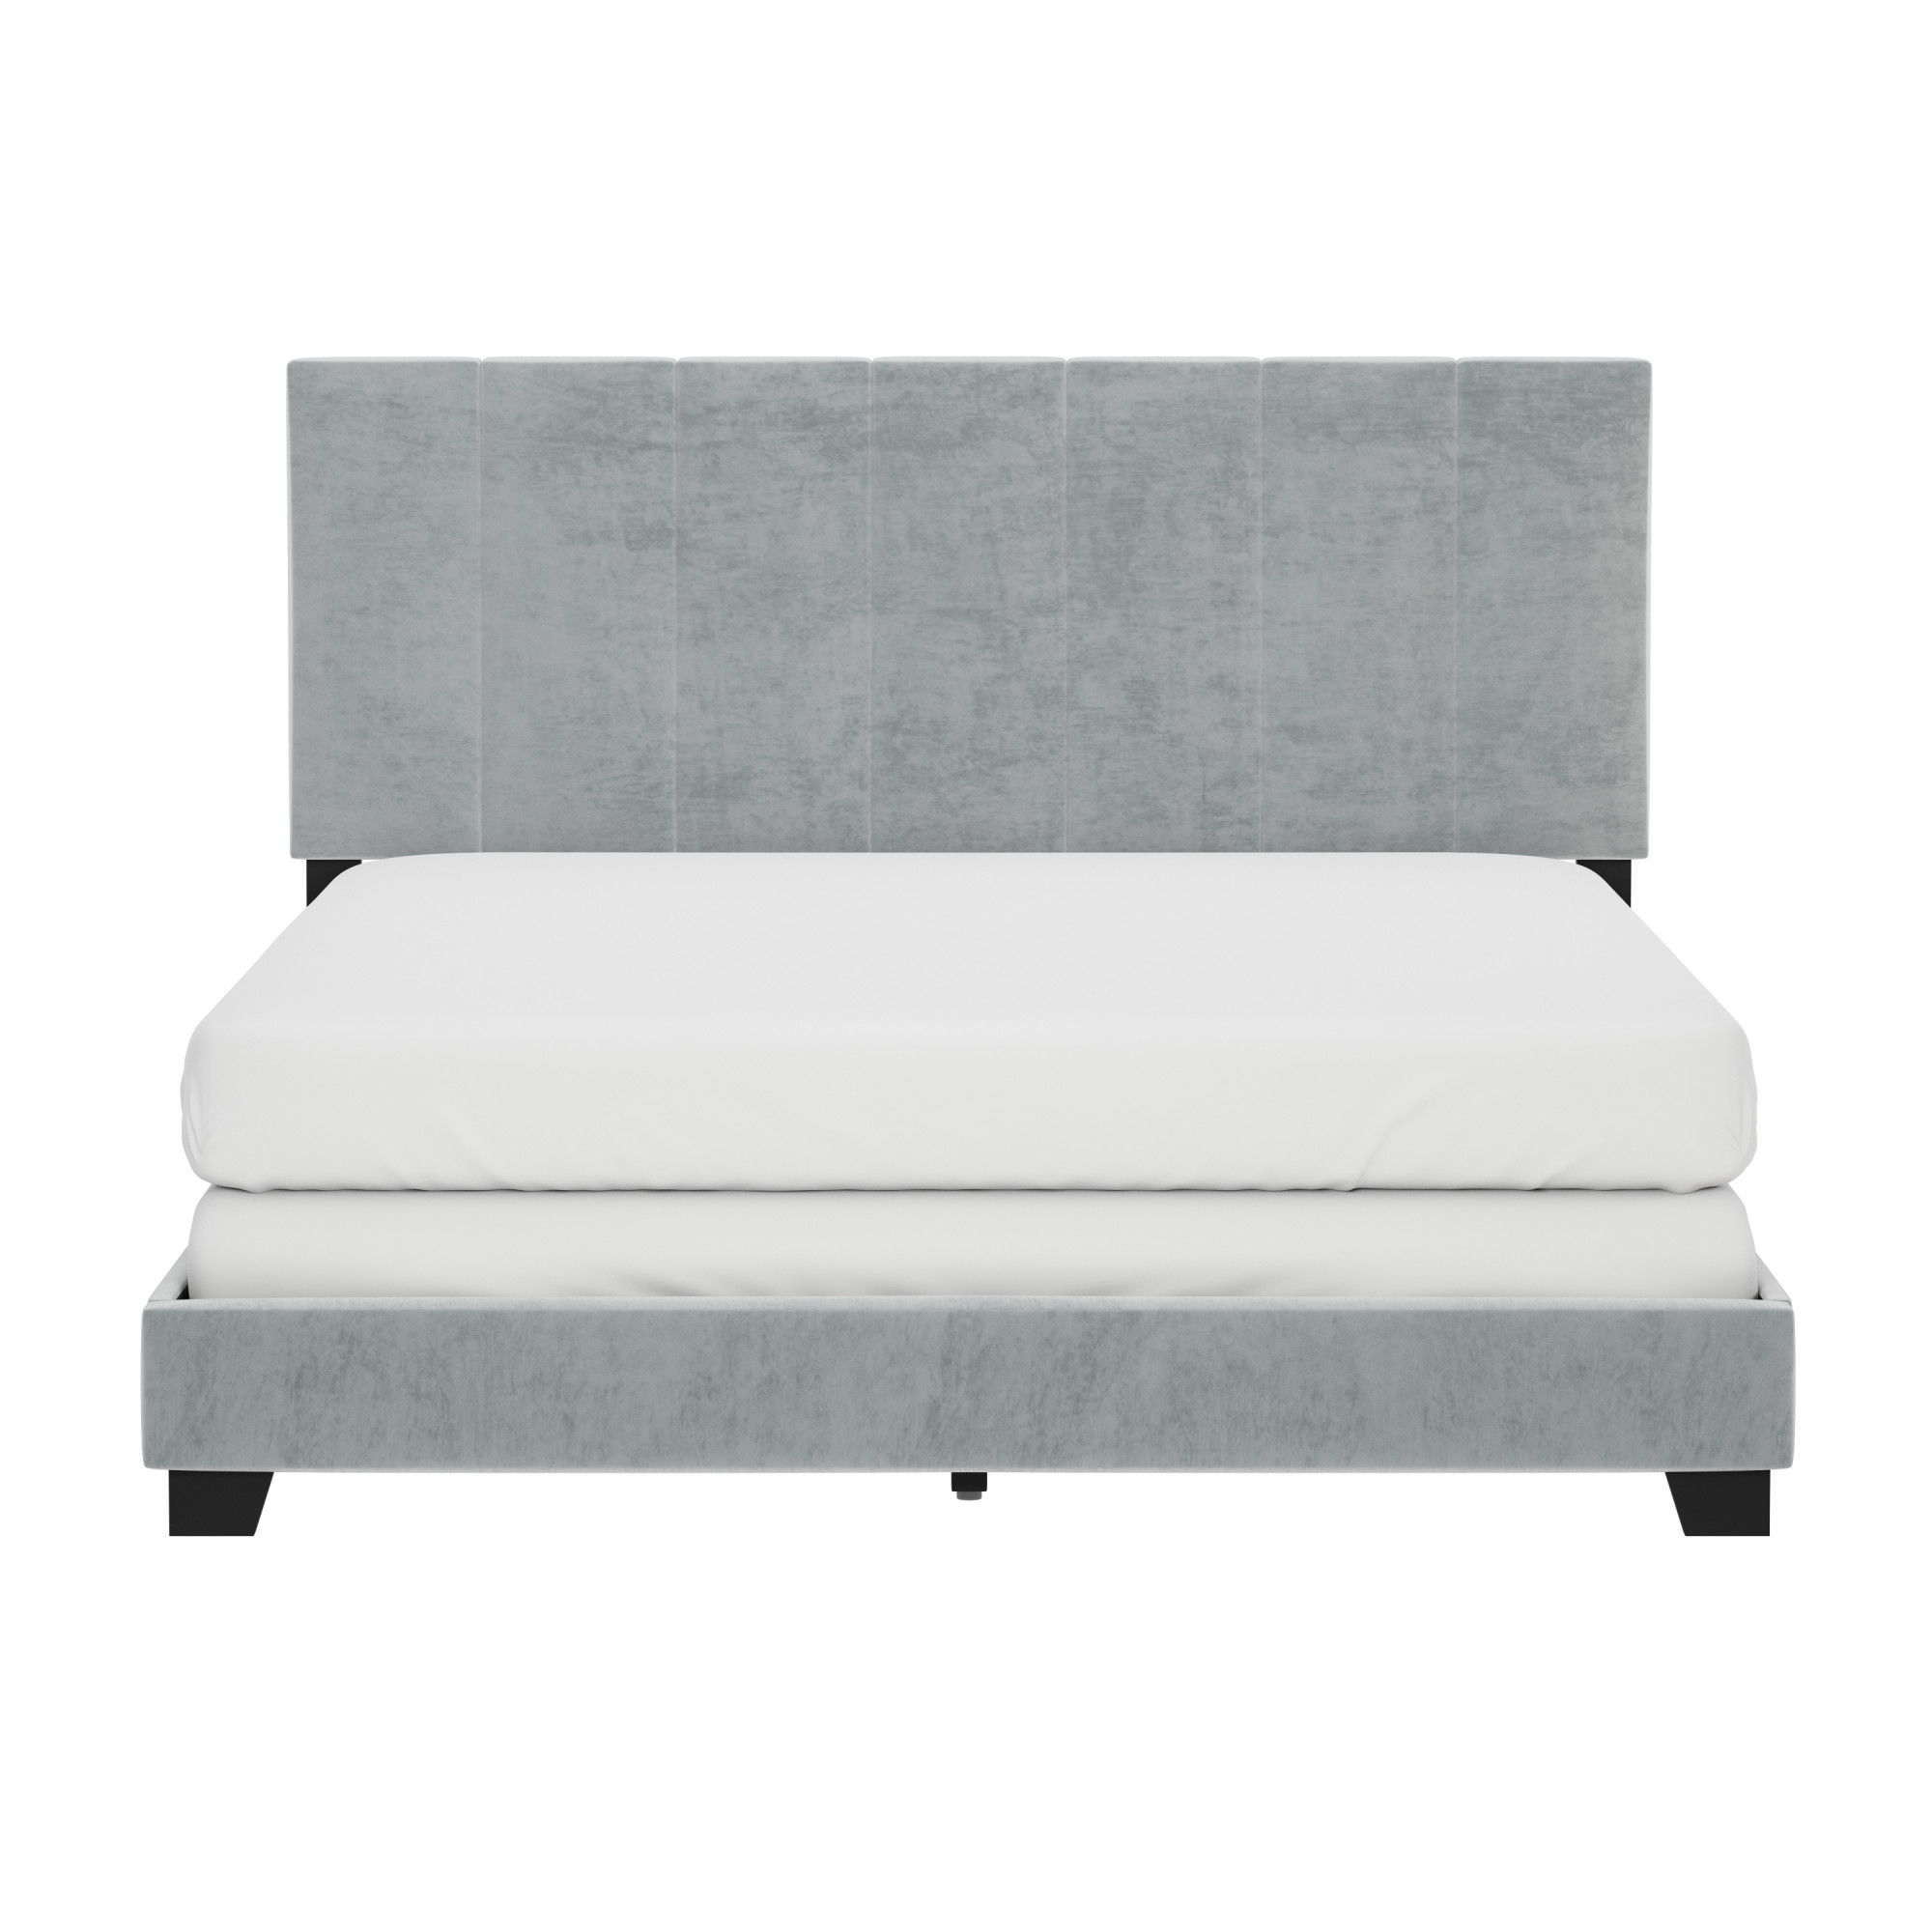 Reece Channel Stitched Upholstered Queen Bed, Platinum Gray, by Hillsdale Living Essentials - image 2 of 14